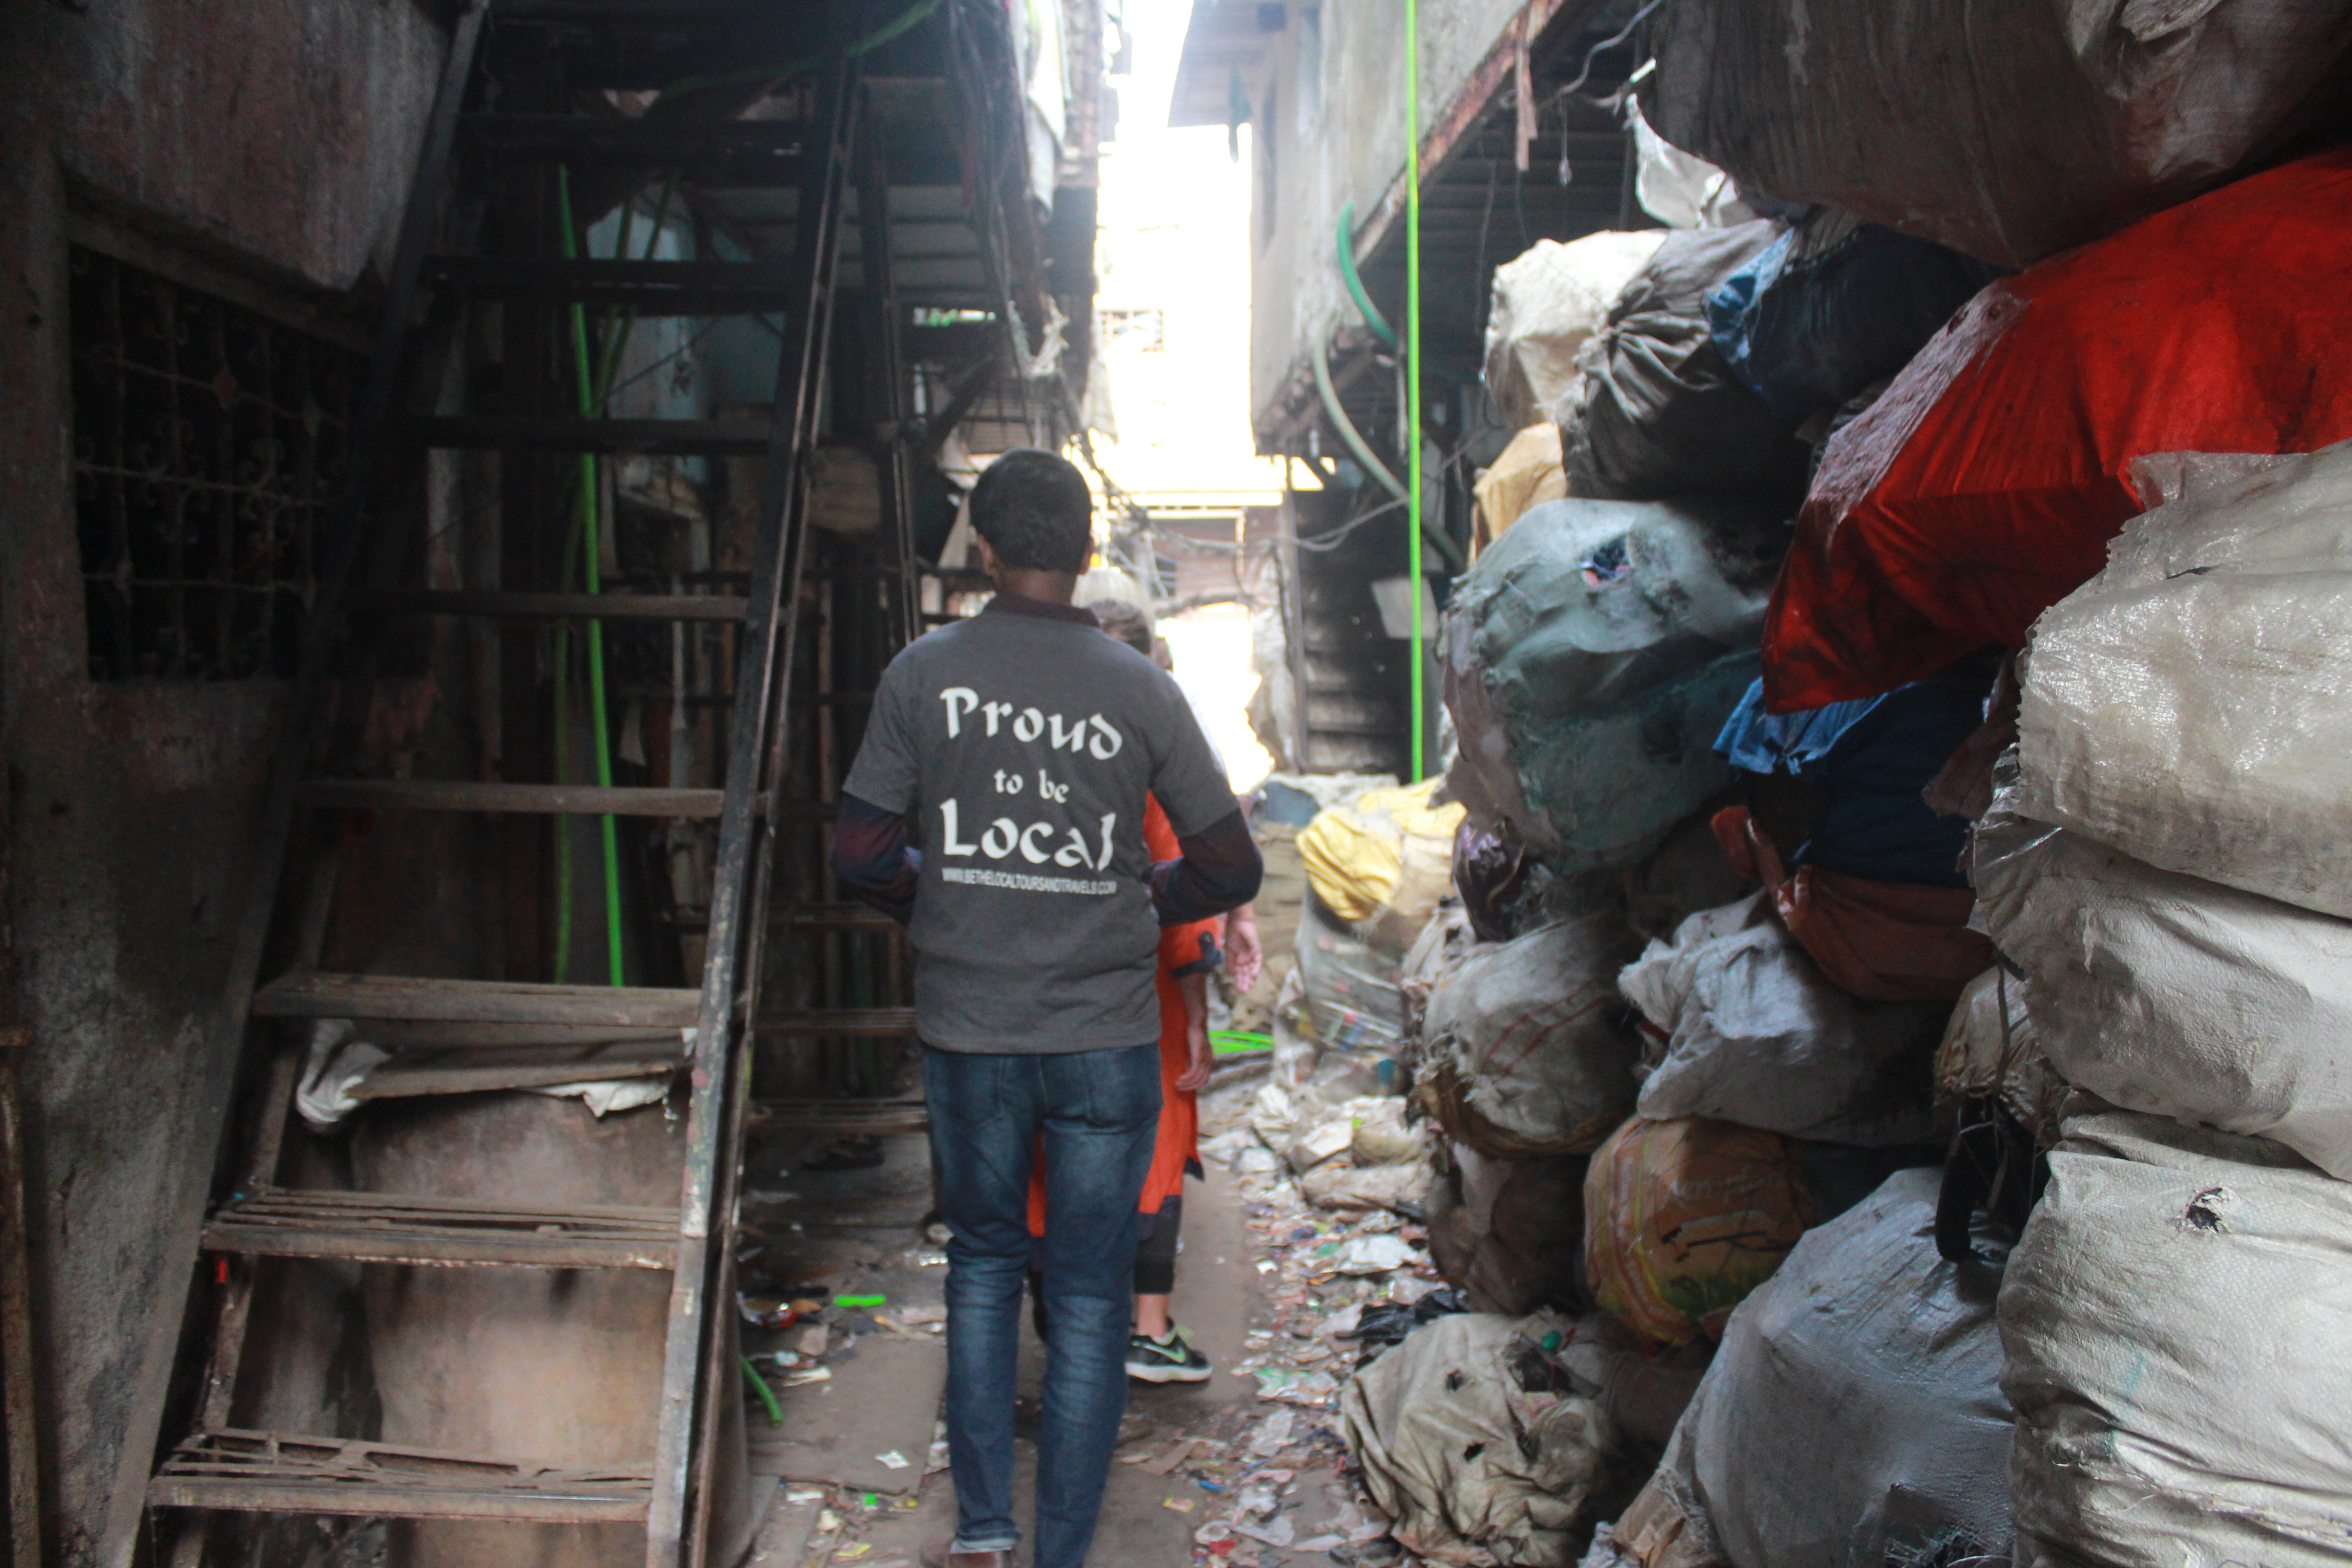 On a tour through Dharavi with a local tour guide. Photo: Bianca Caruana